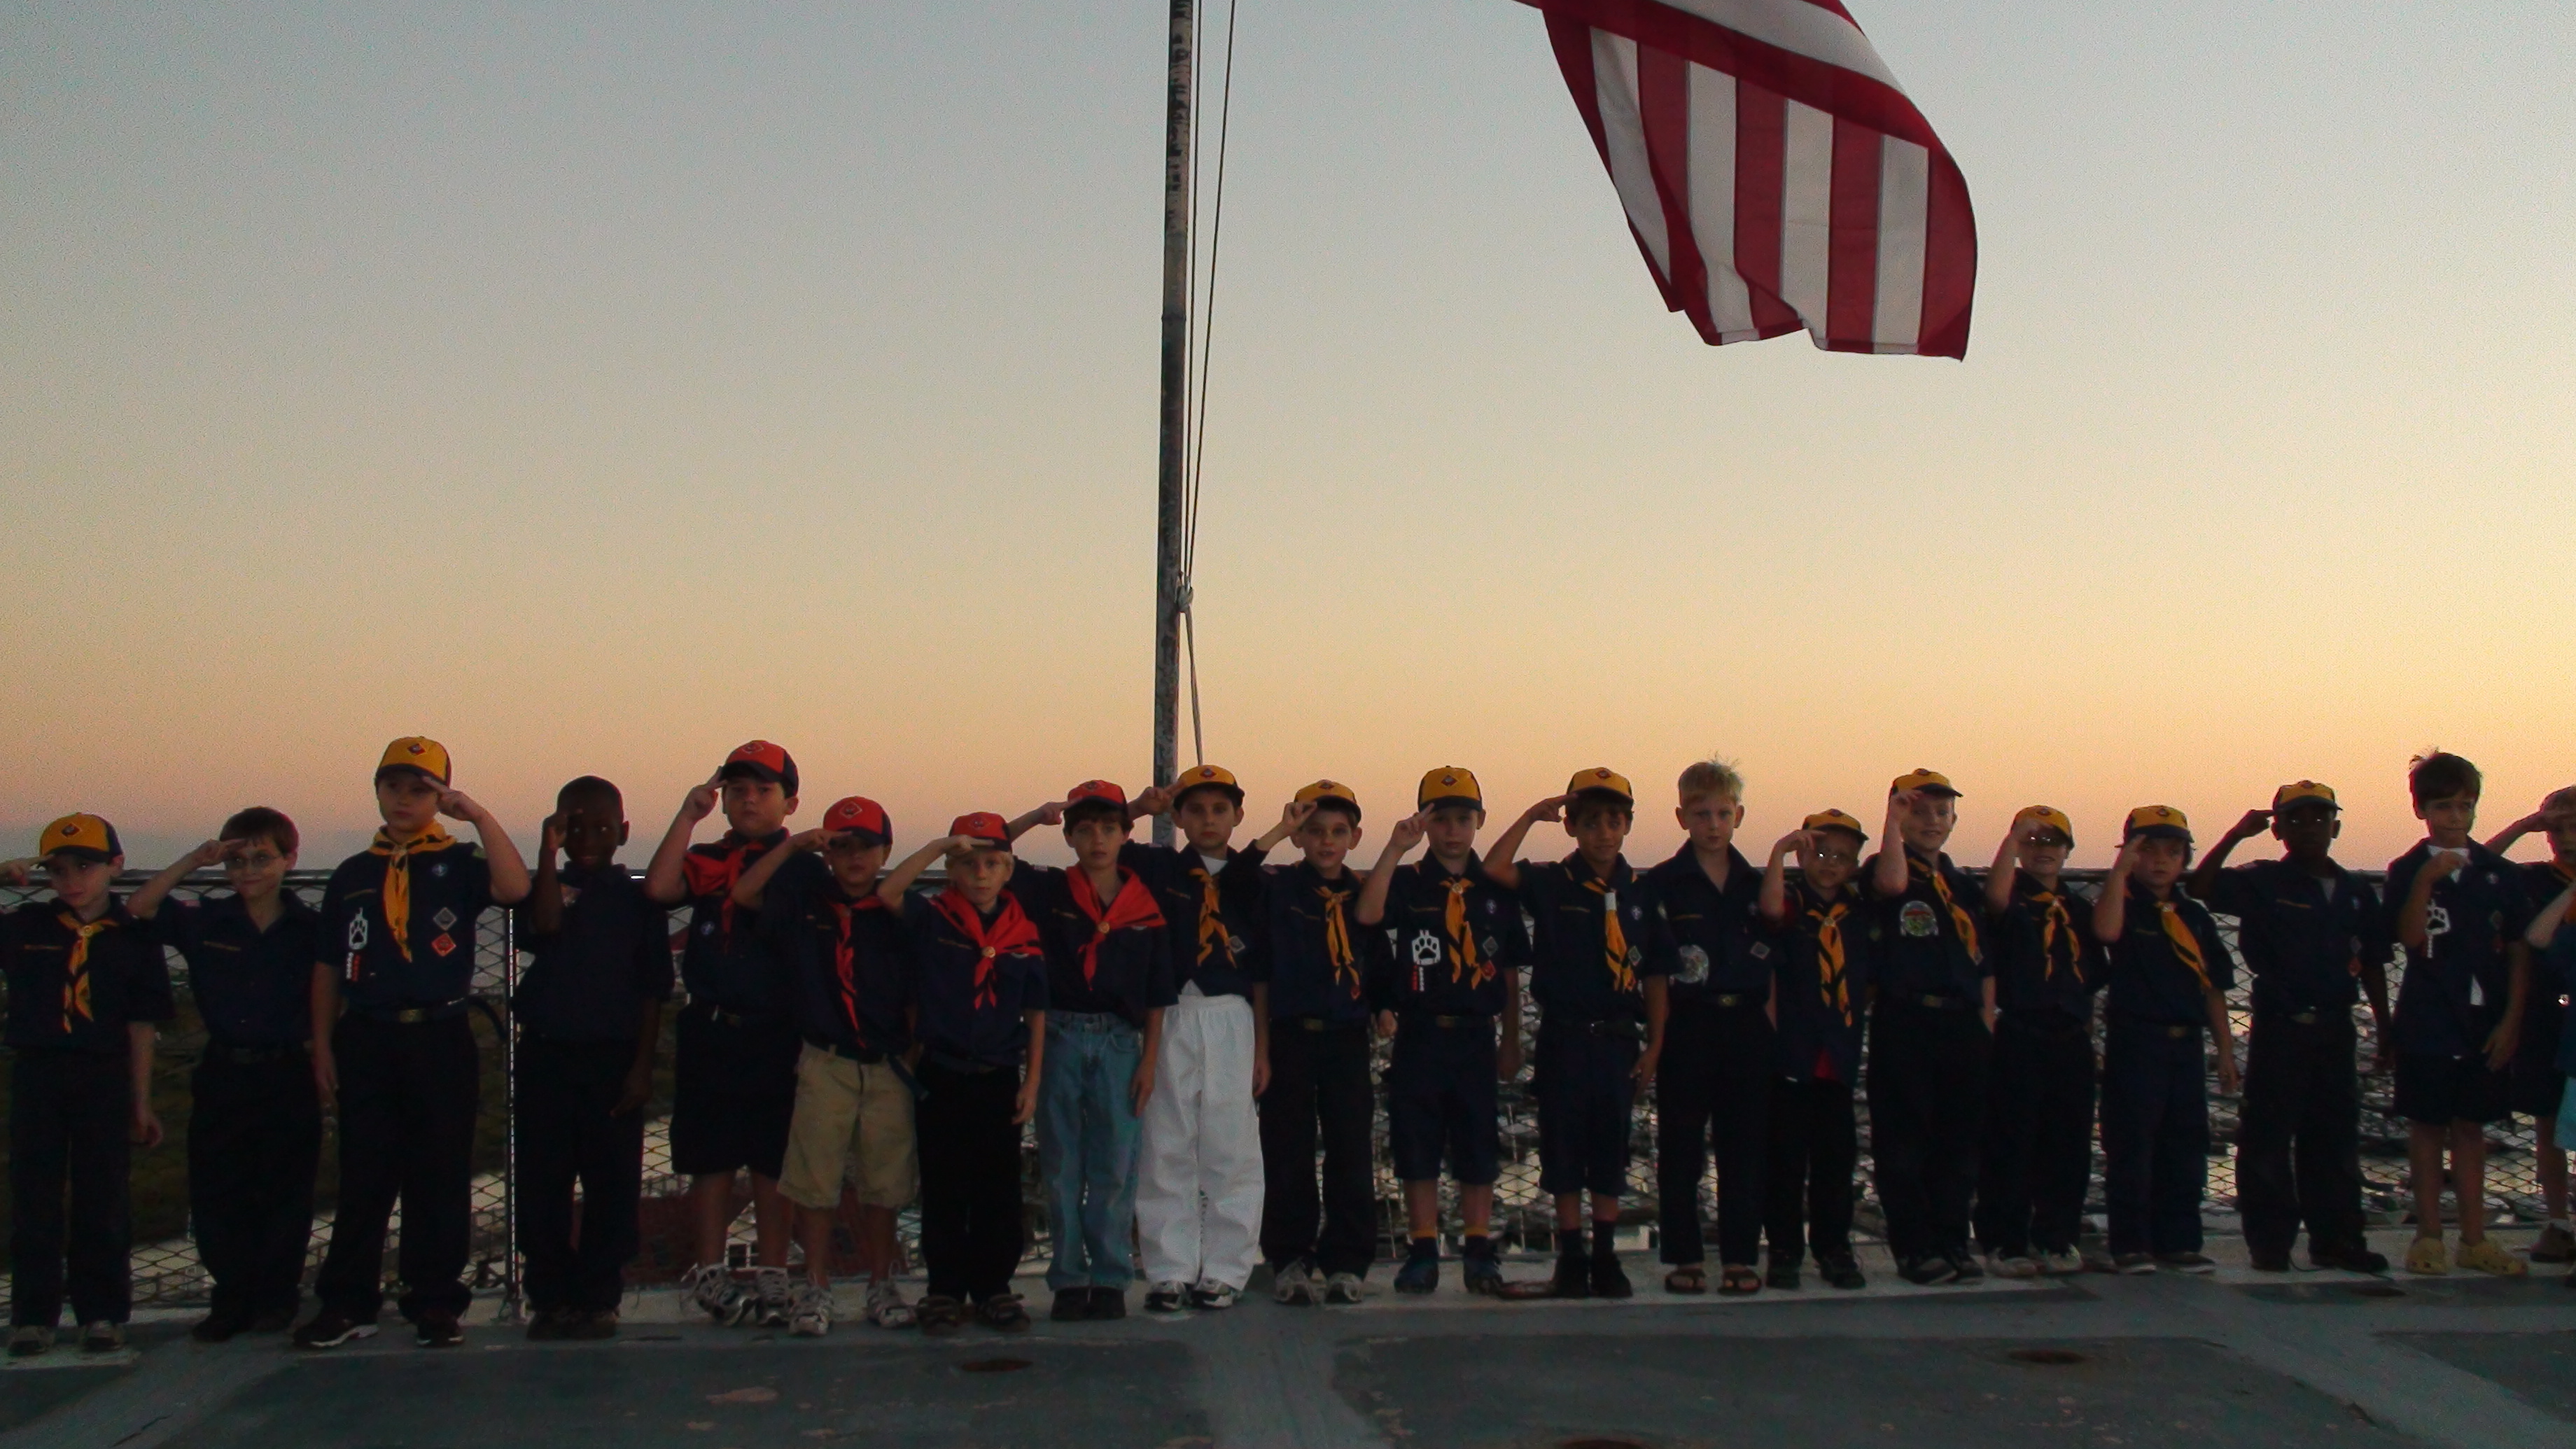 Cub scouts assembled on the aft end of the flight deck for flag program.